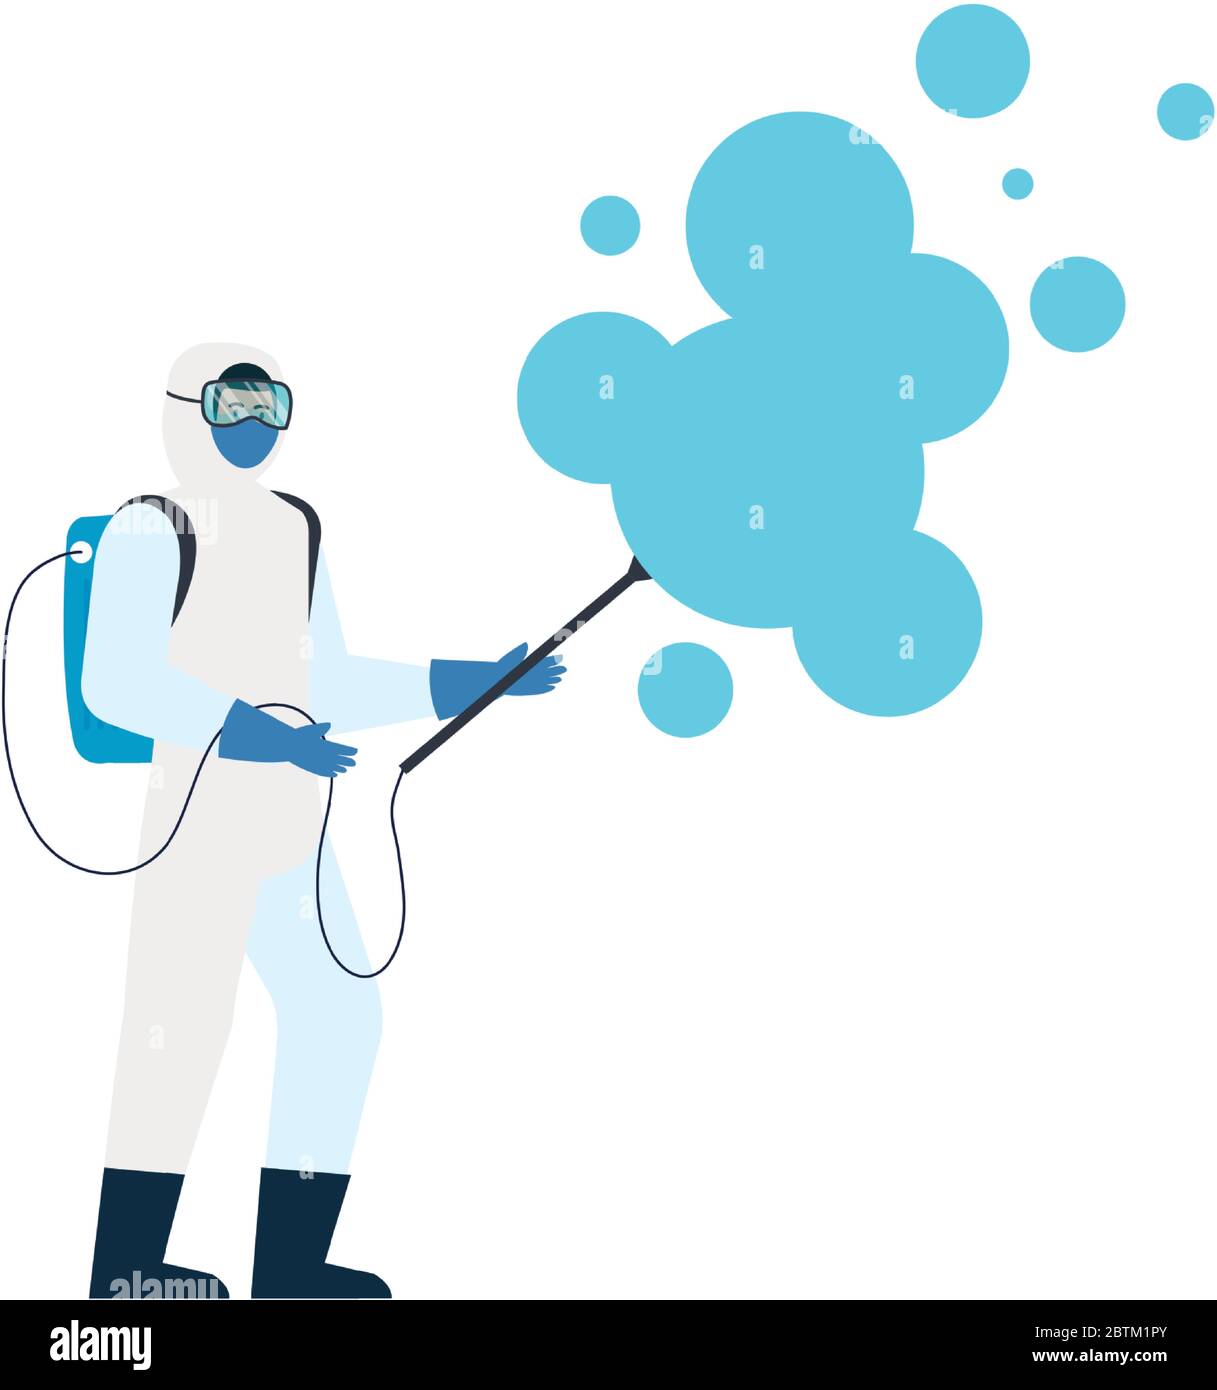 person with protective suit for spraying viruses of covid 19, disinfection virus concept Stock Vector